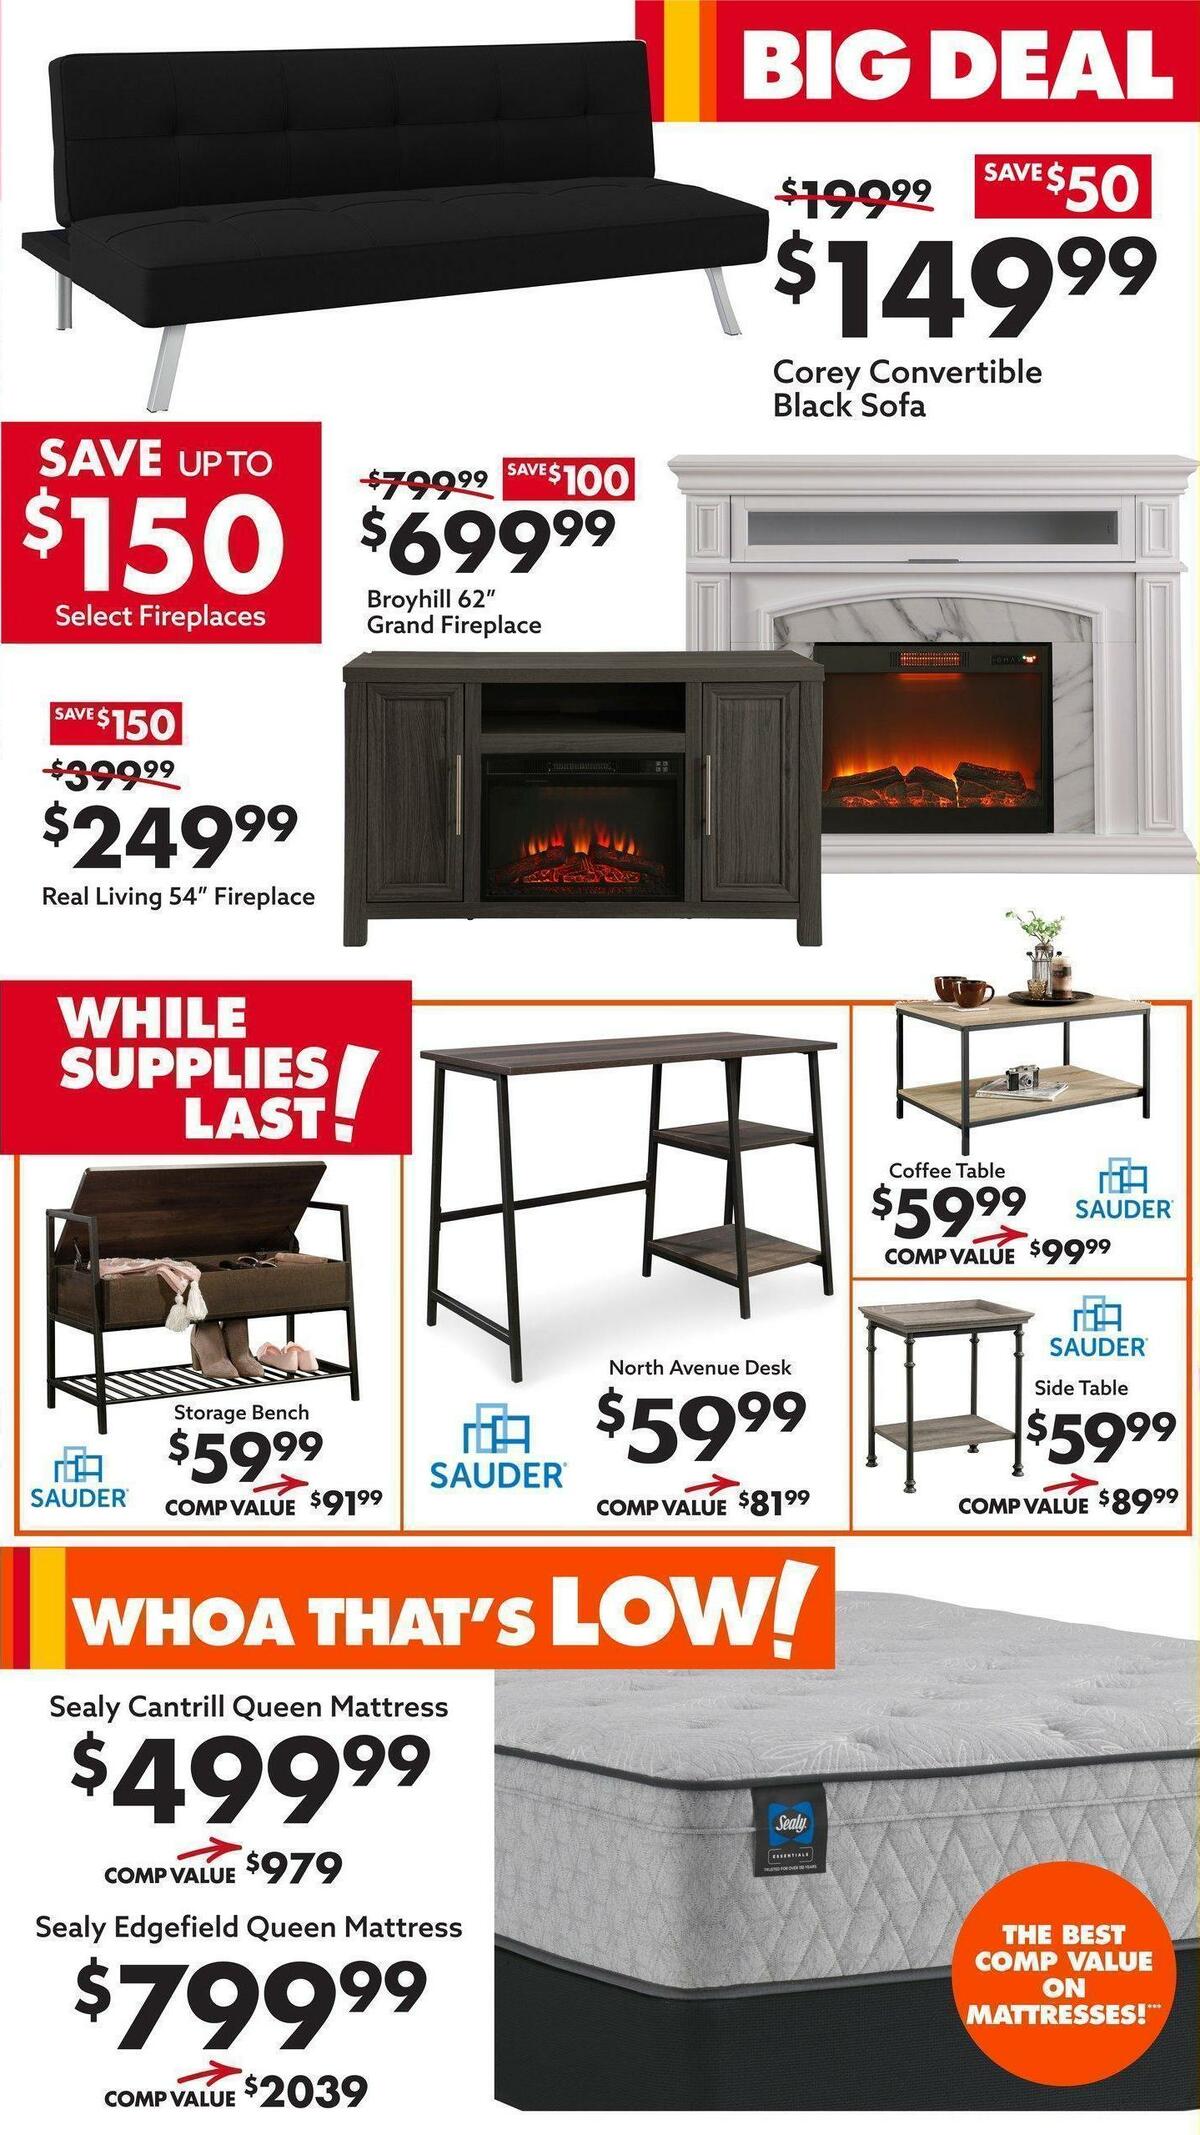 Big Lots Weekly Ad from January 21